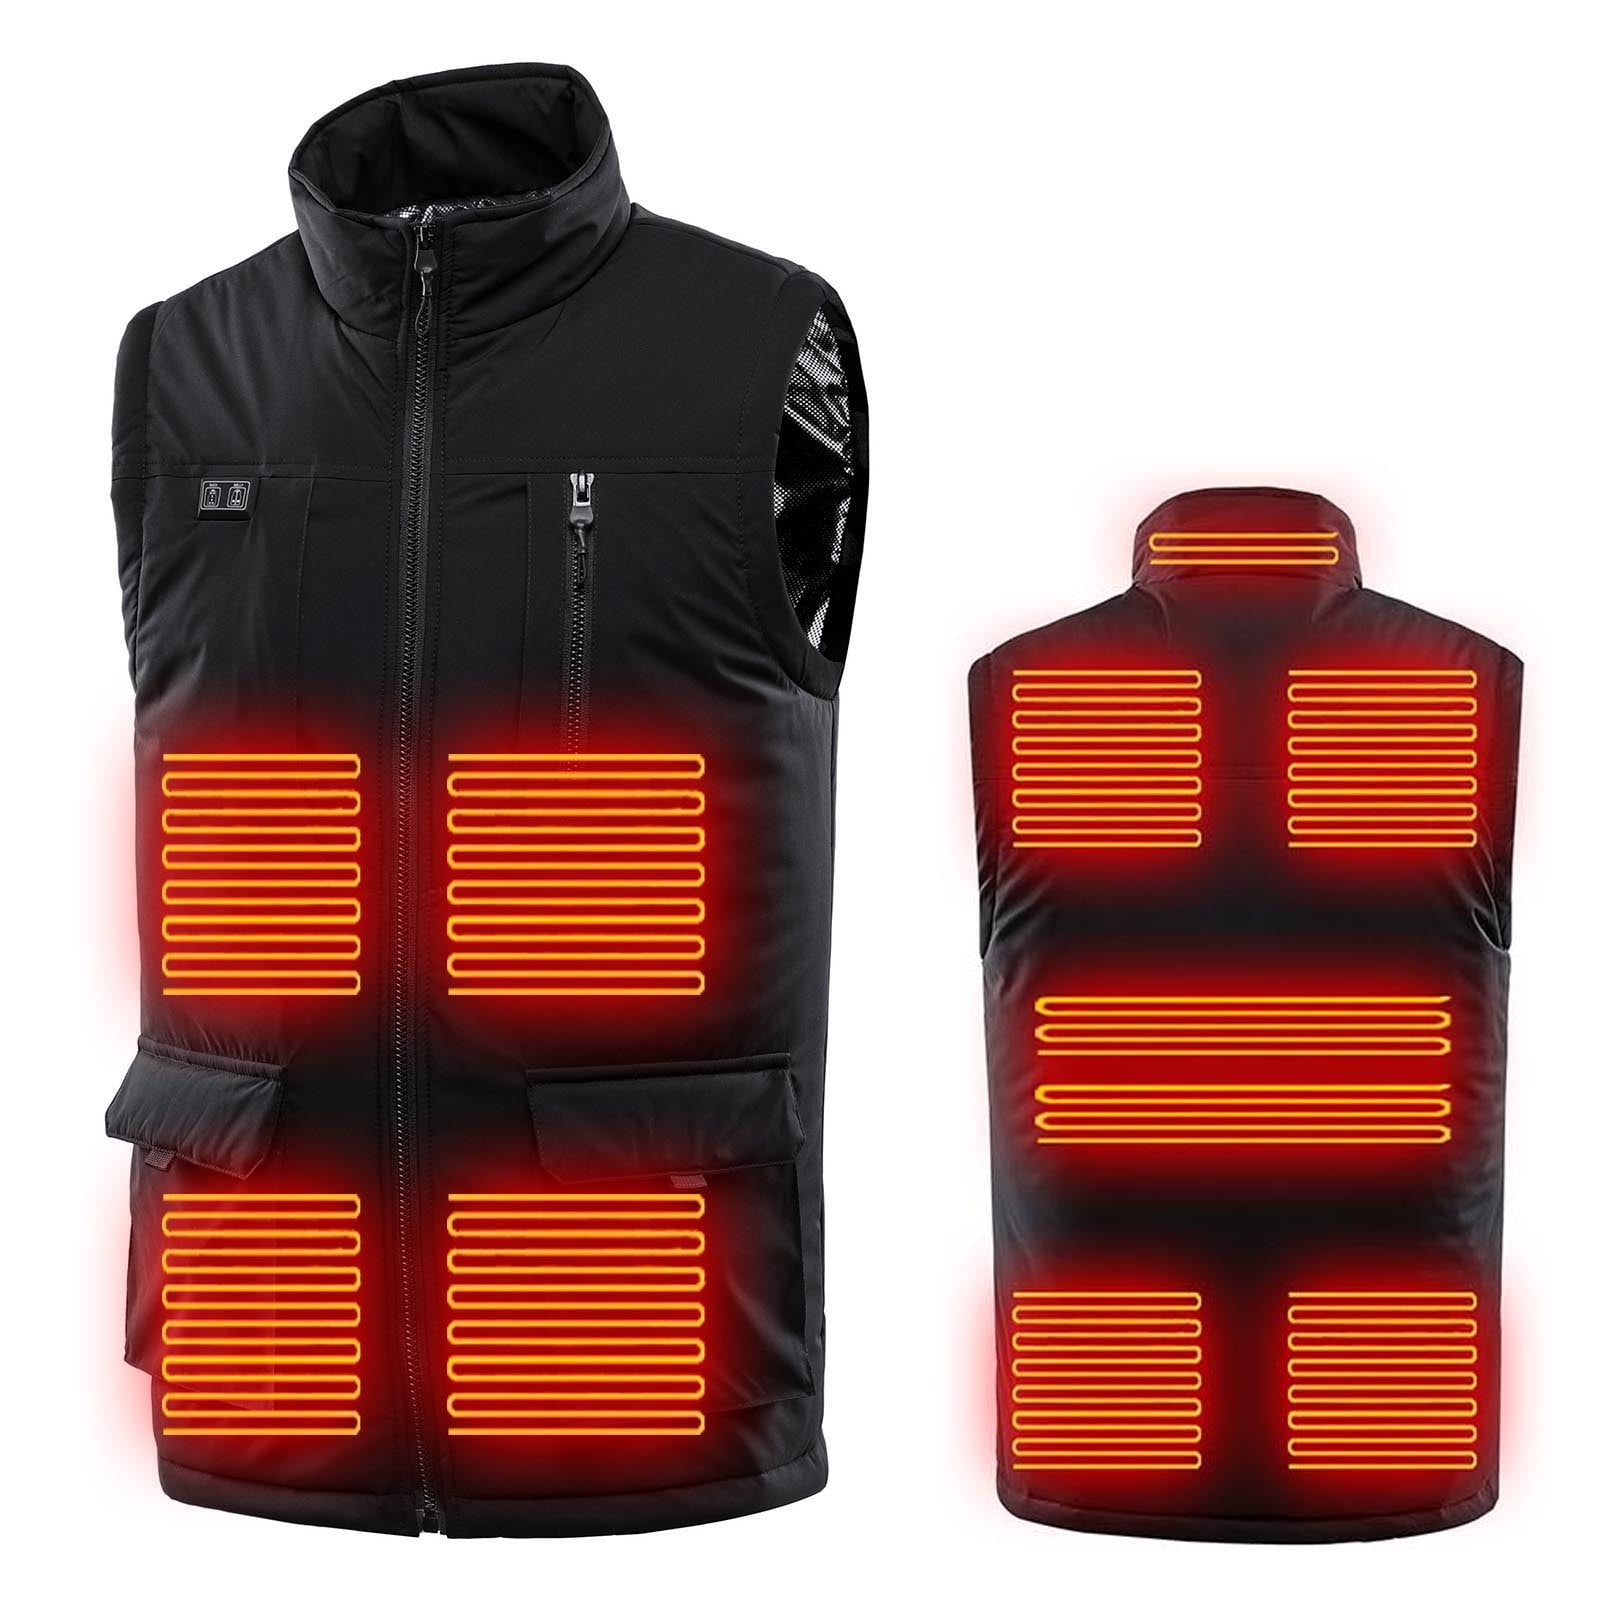 Battery Not Included Smart Electric Heating Vest Rechargeable Warming heated Jacket Upgraded Heated Vest for Women Men